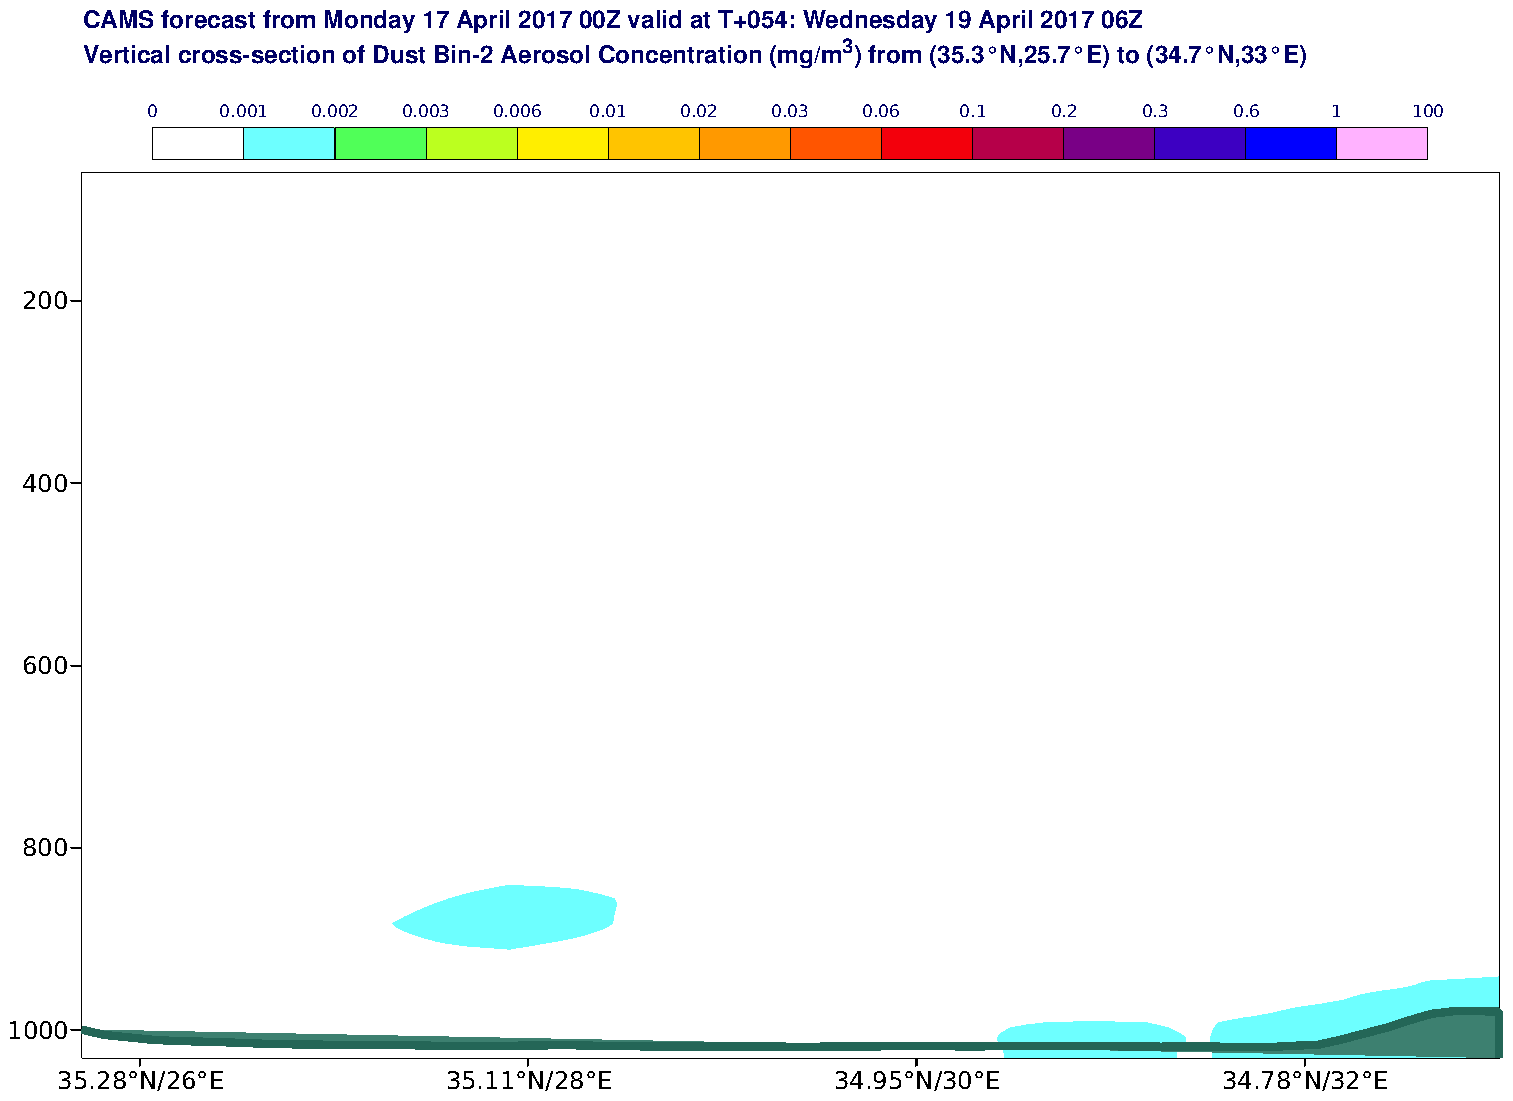 Vertical cross-section of Dust Bin-2 Aerosol Concentration (mg/m3) valid at T54 - 2017-04-19 06:00